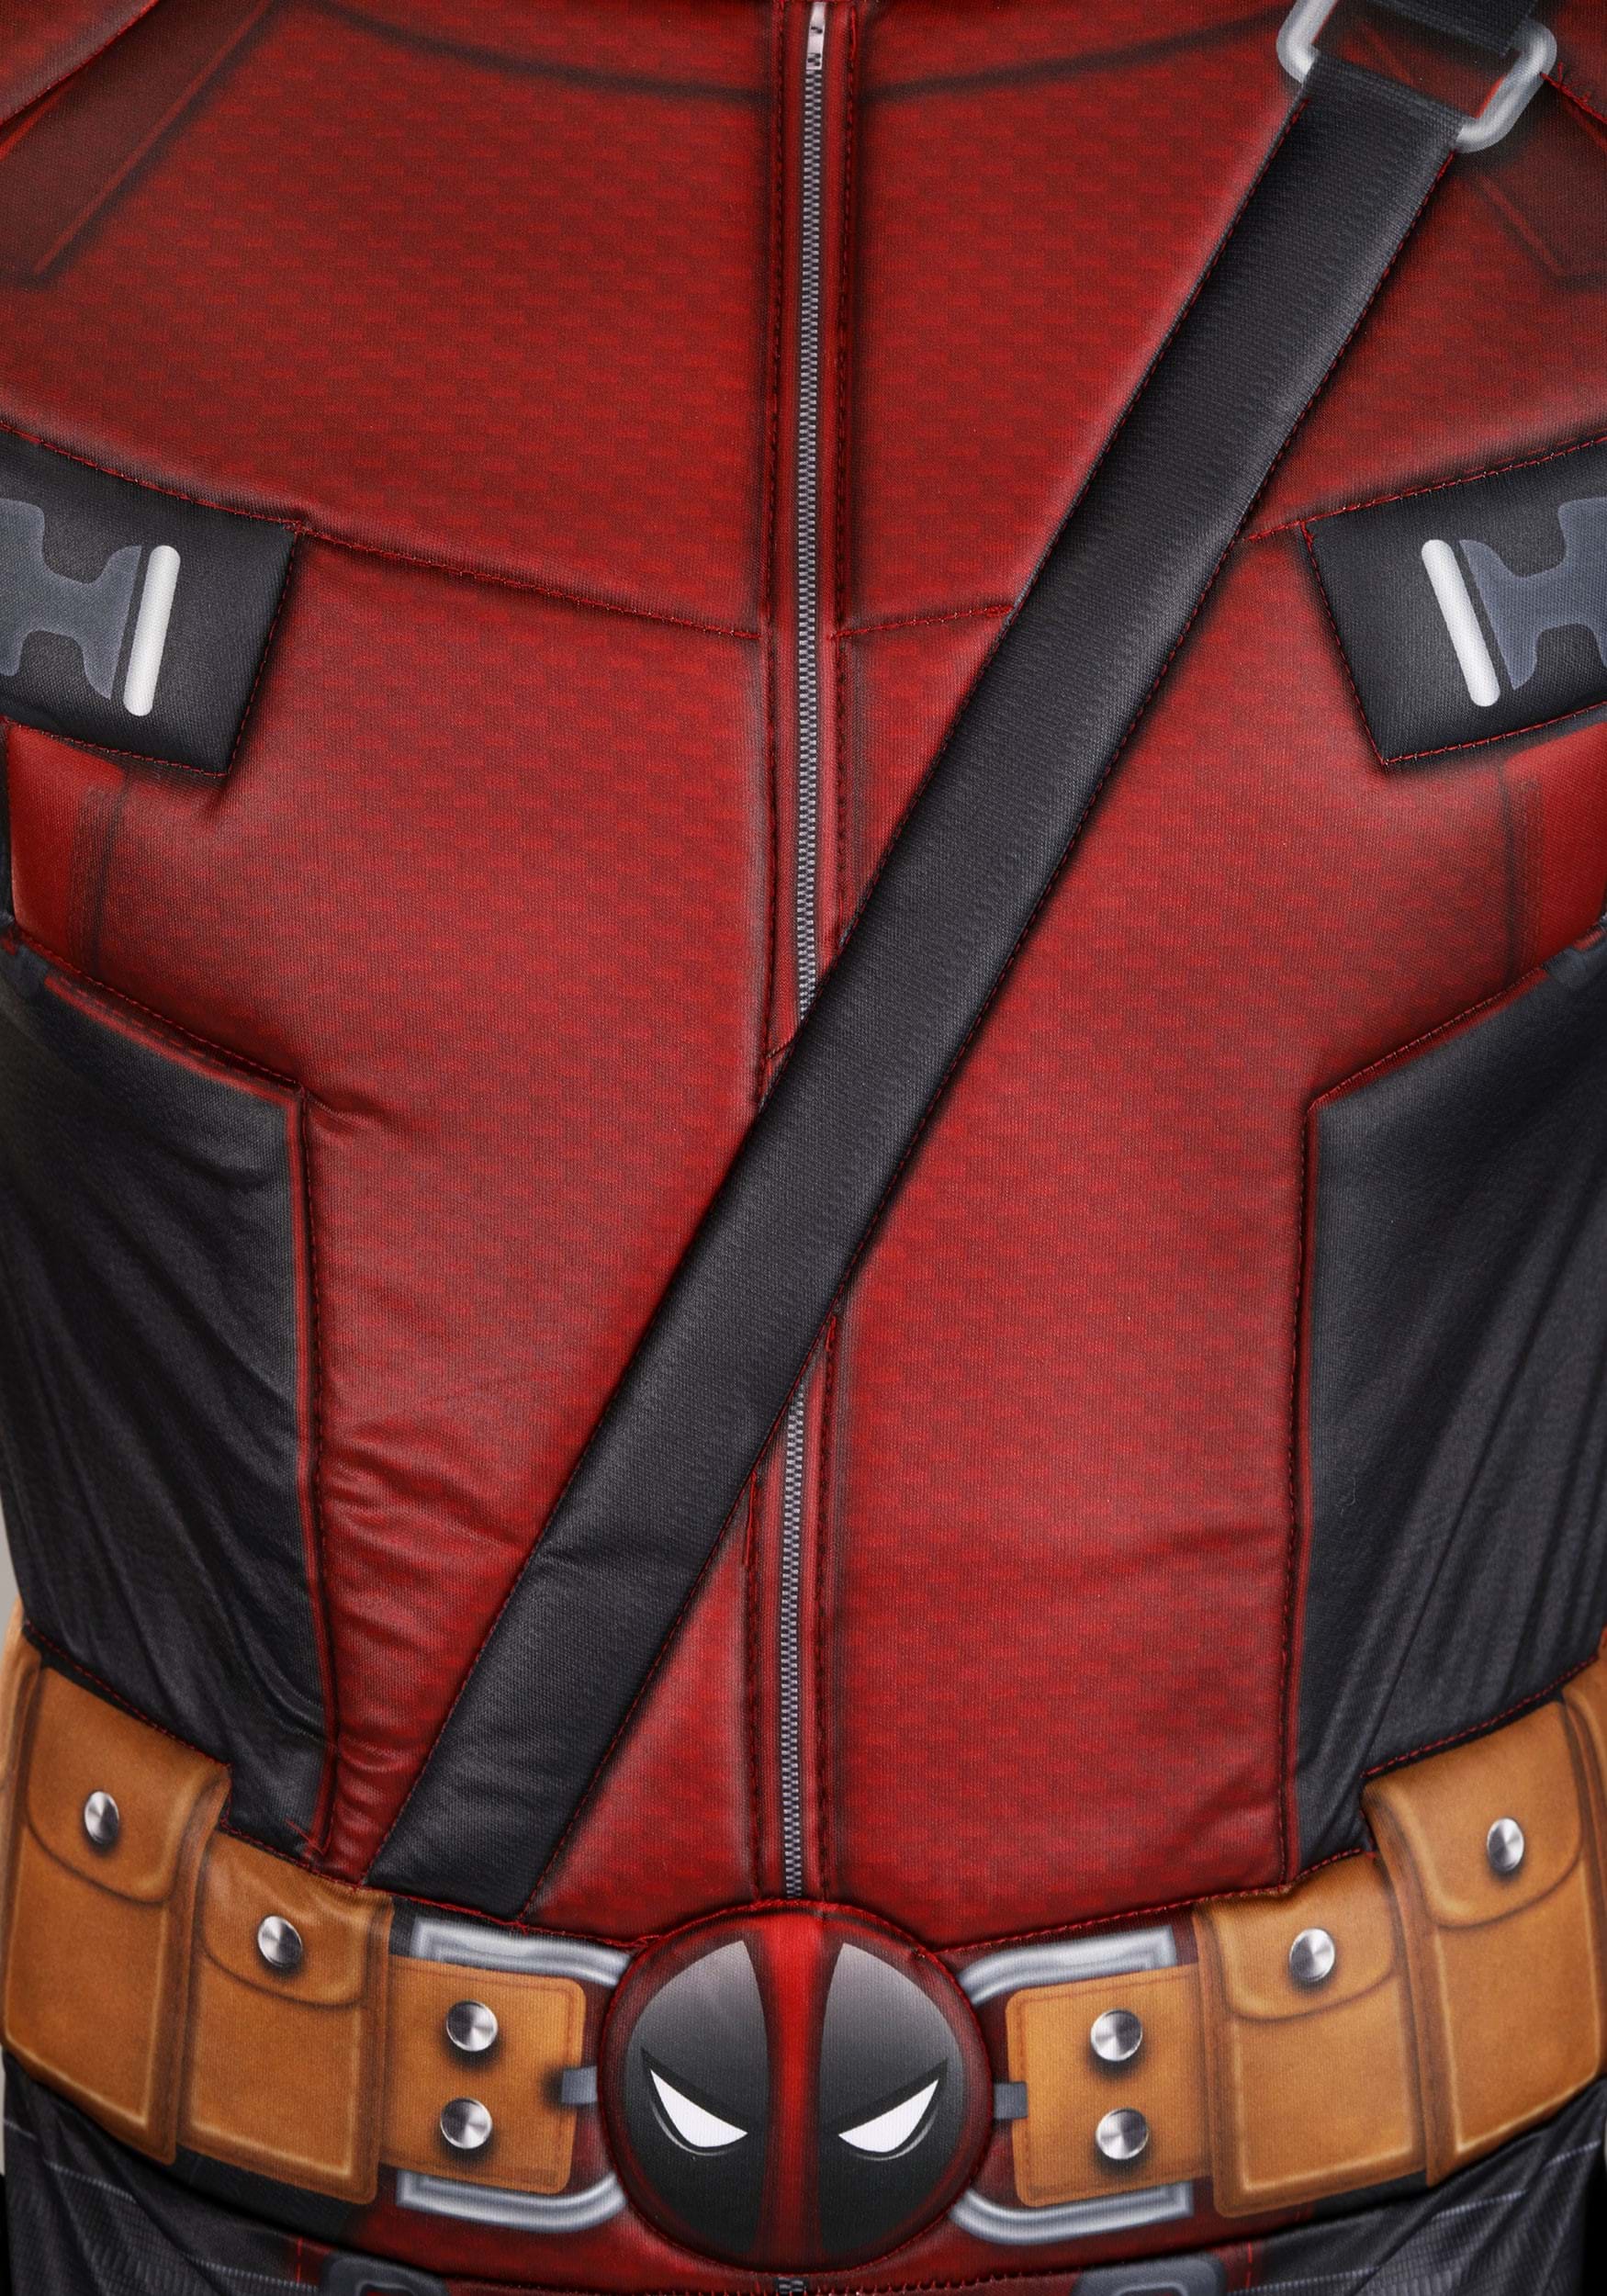 Deadpool Costume for Adults